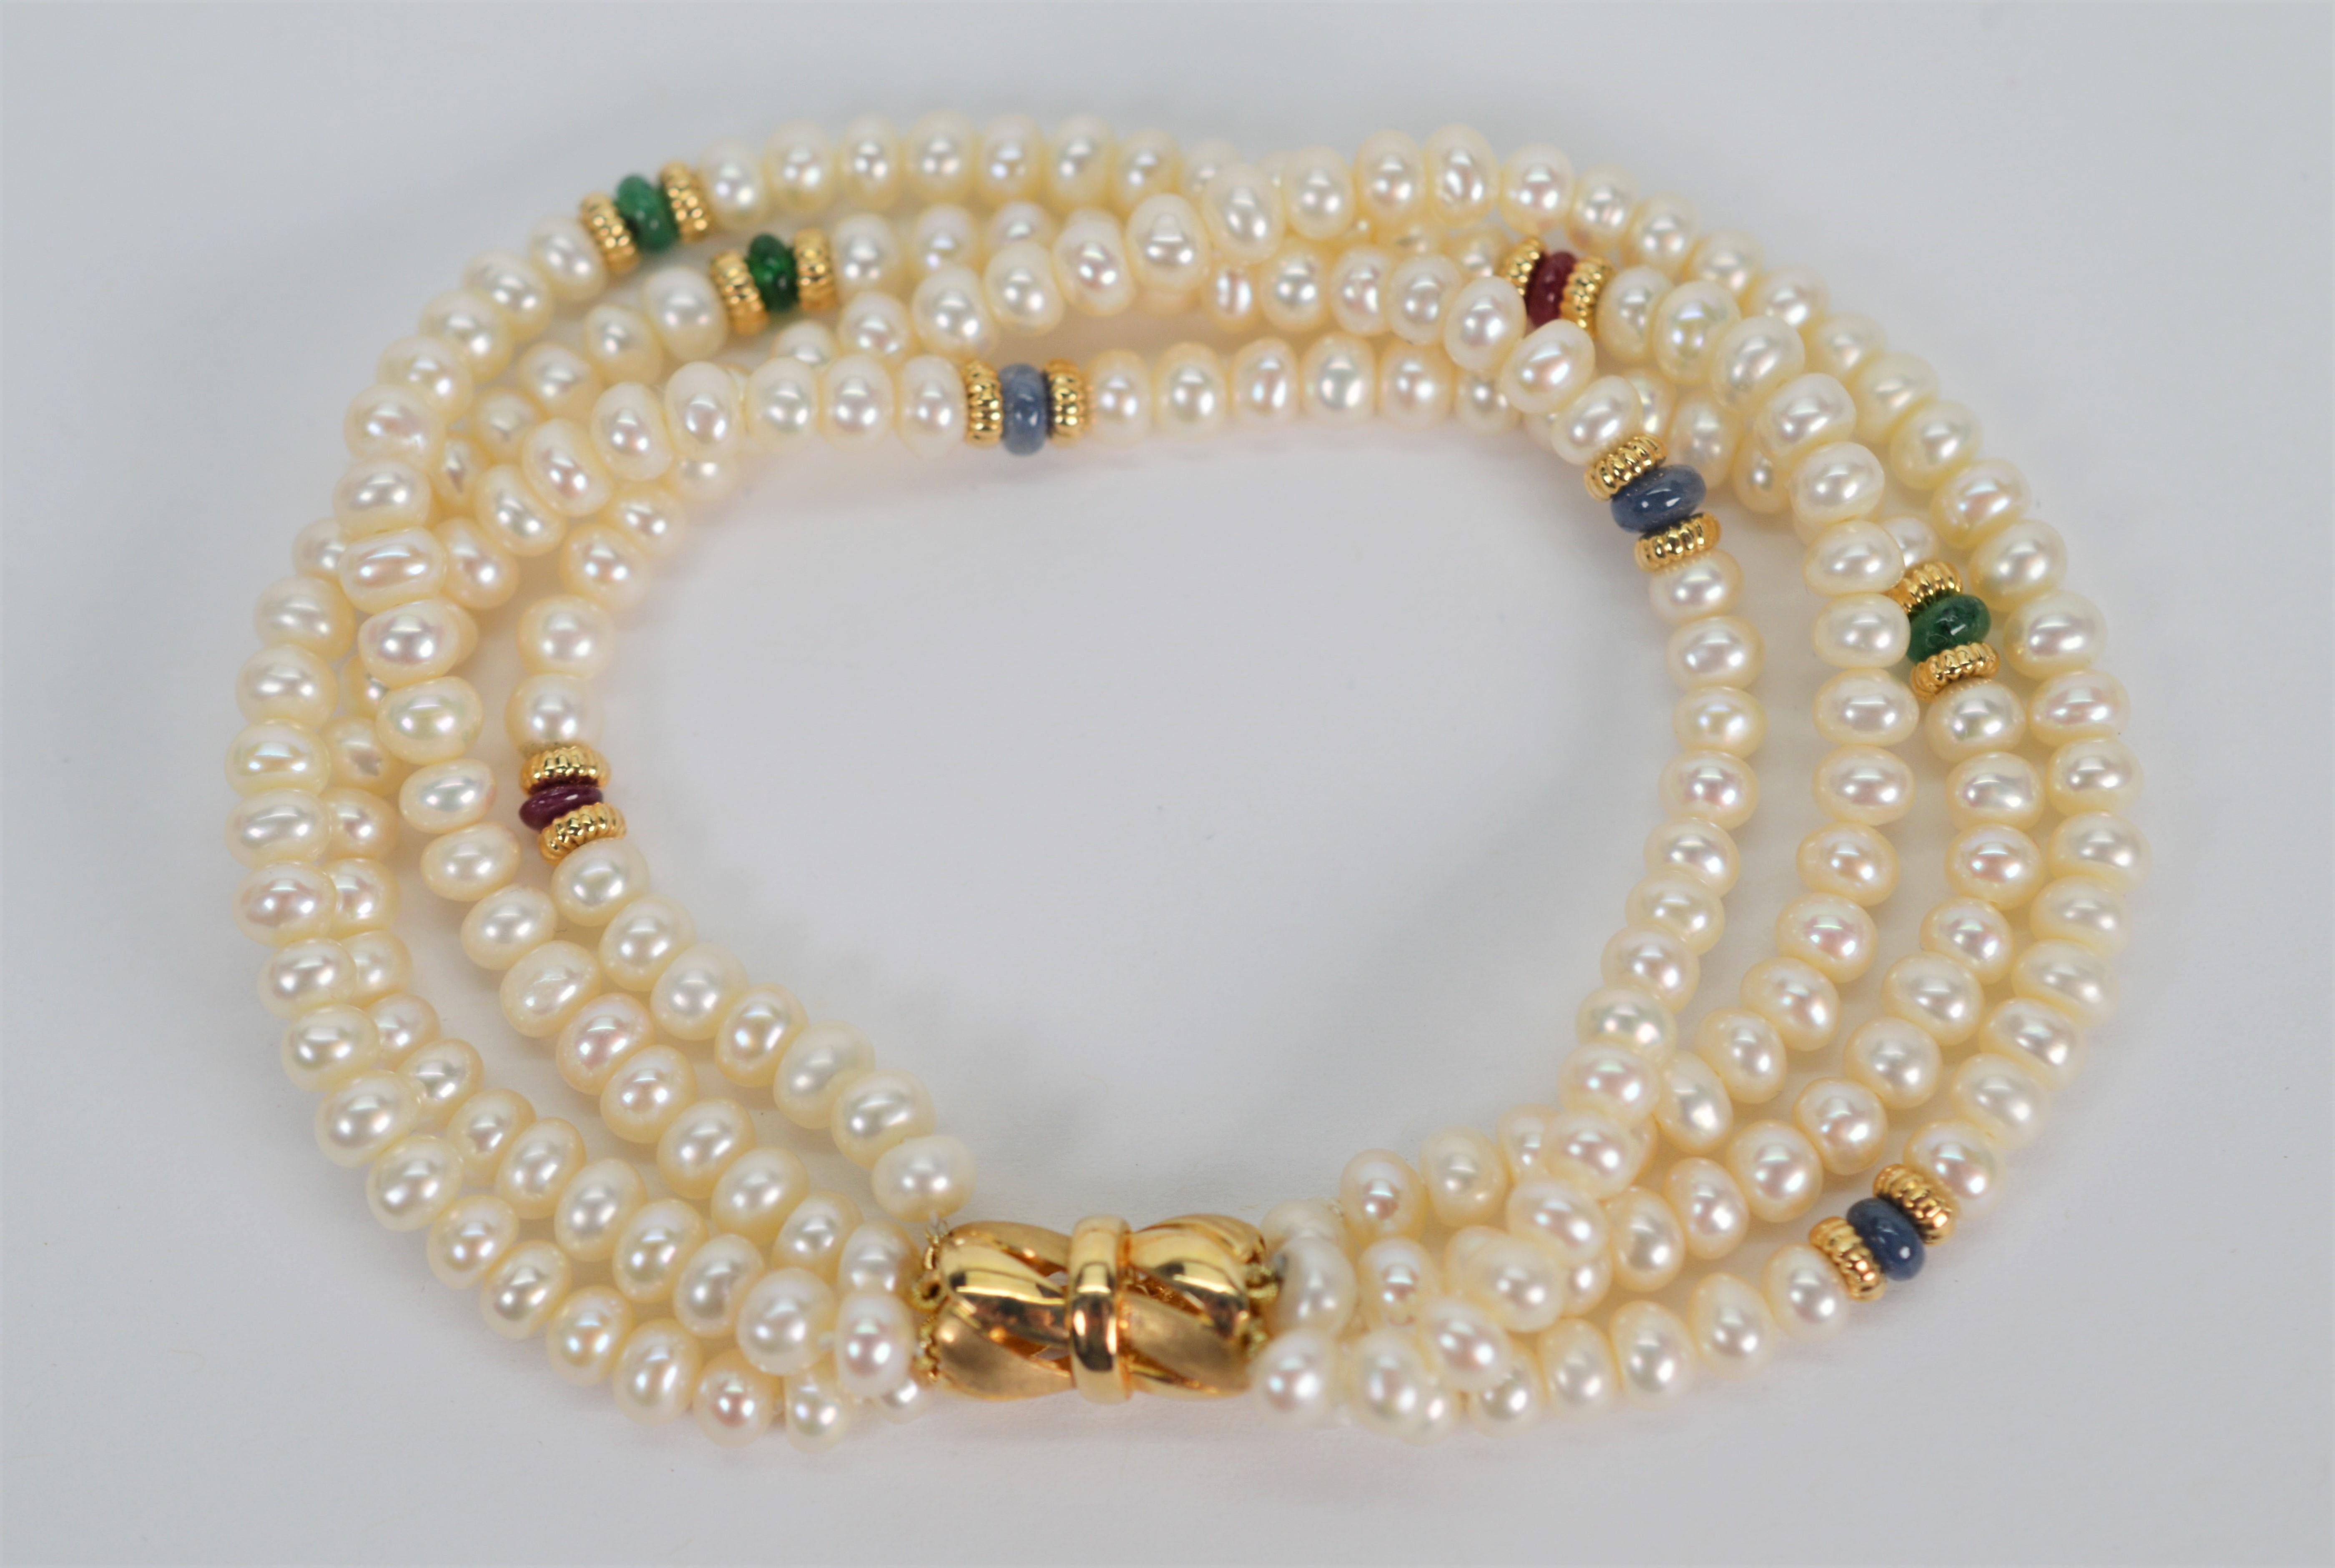 Fours strands of silky button pearls accented with colorful green jade  blue lapis and pink ruby gemstone beads create this versatile eight inch bracelet. Featured is an attractive 15.5mm decorative clasp of fourteen karat yellow gold with an